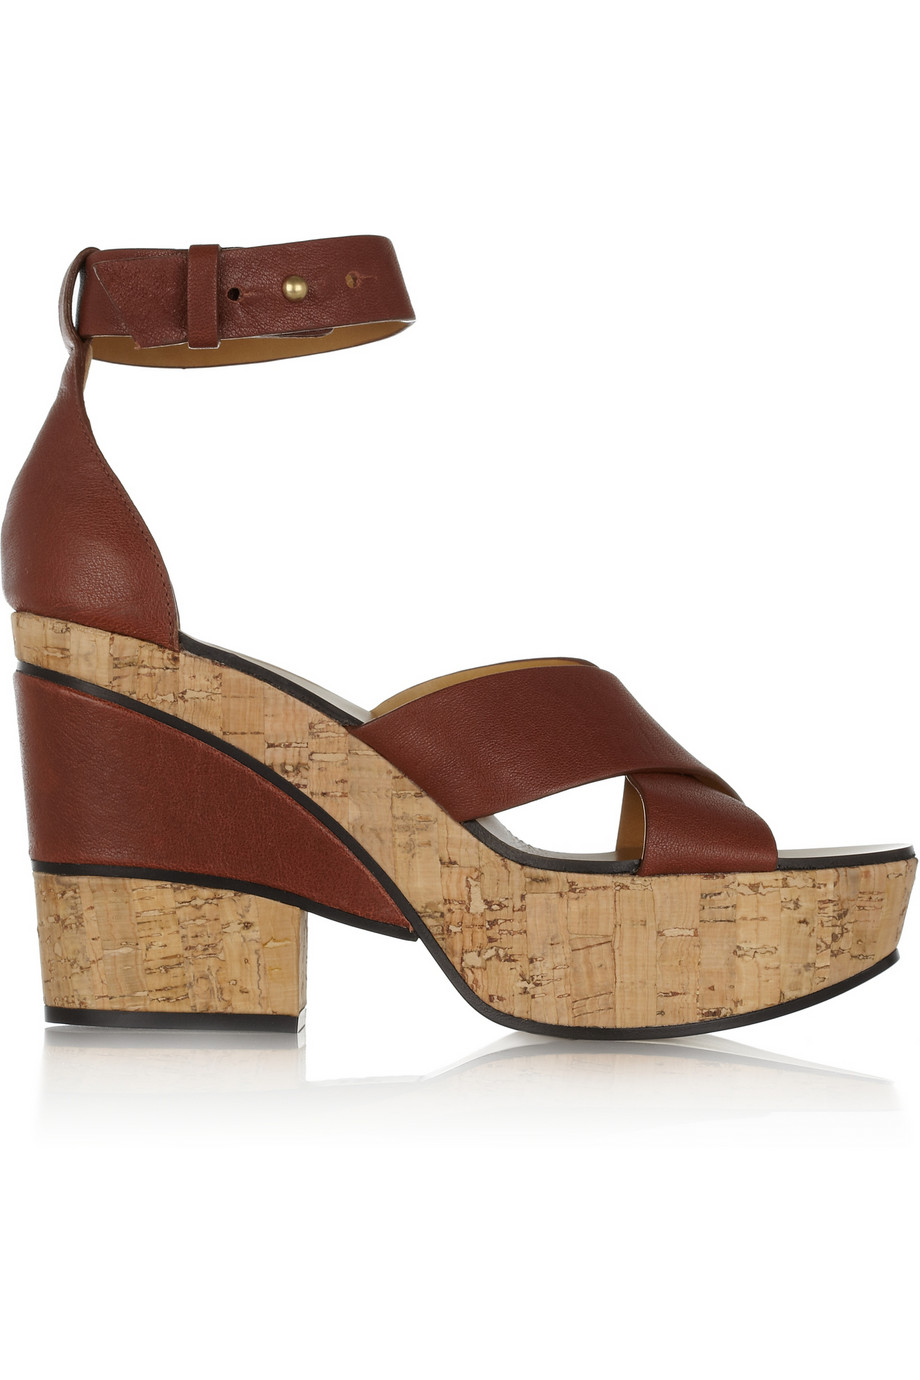 Chloé Leather and Cork Platform Sandals in Brown (red) | Lyst